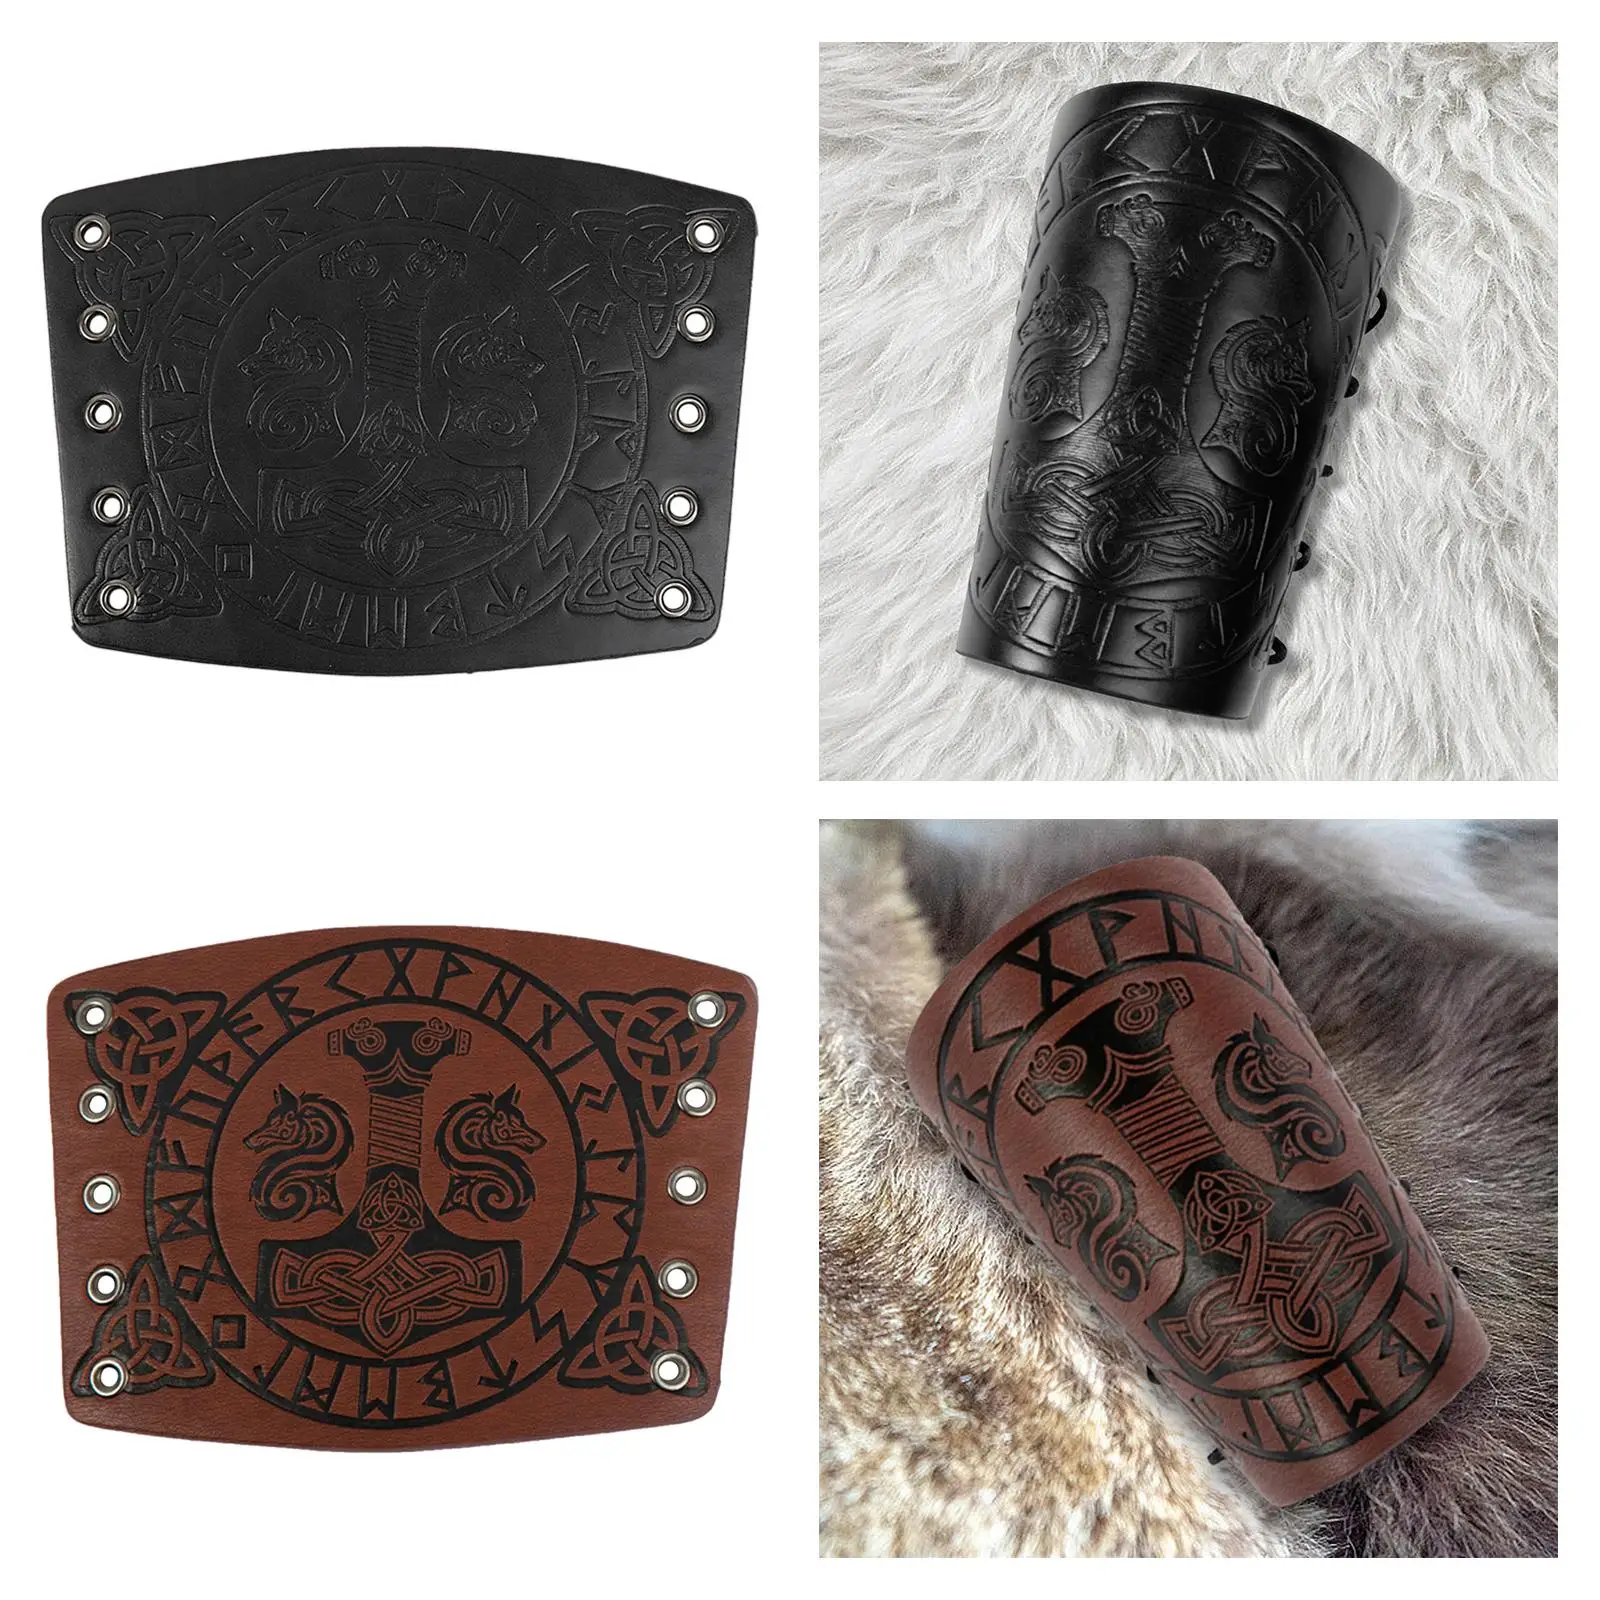 Bracers Cuff Bracelet for Horsing Riding Themed Party Stage Show